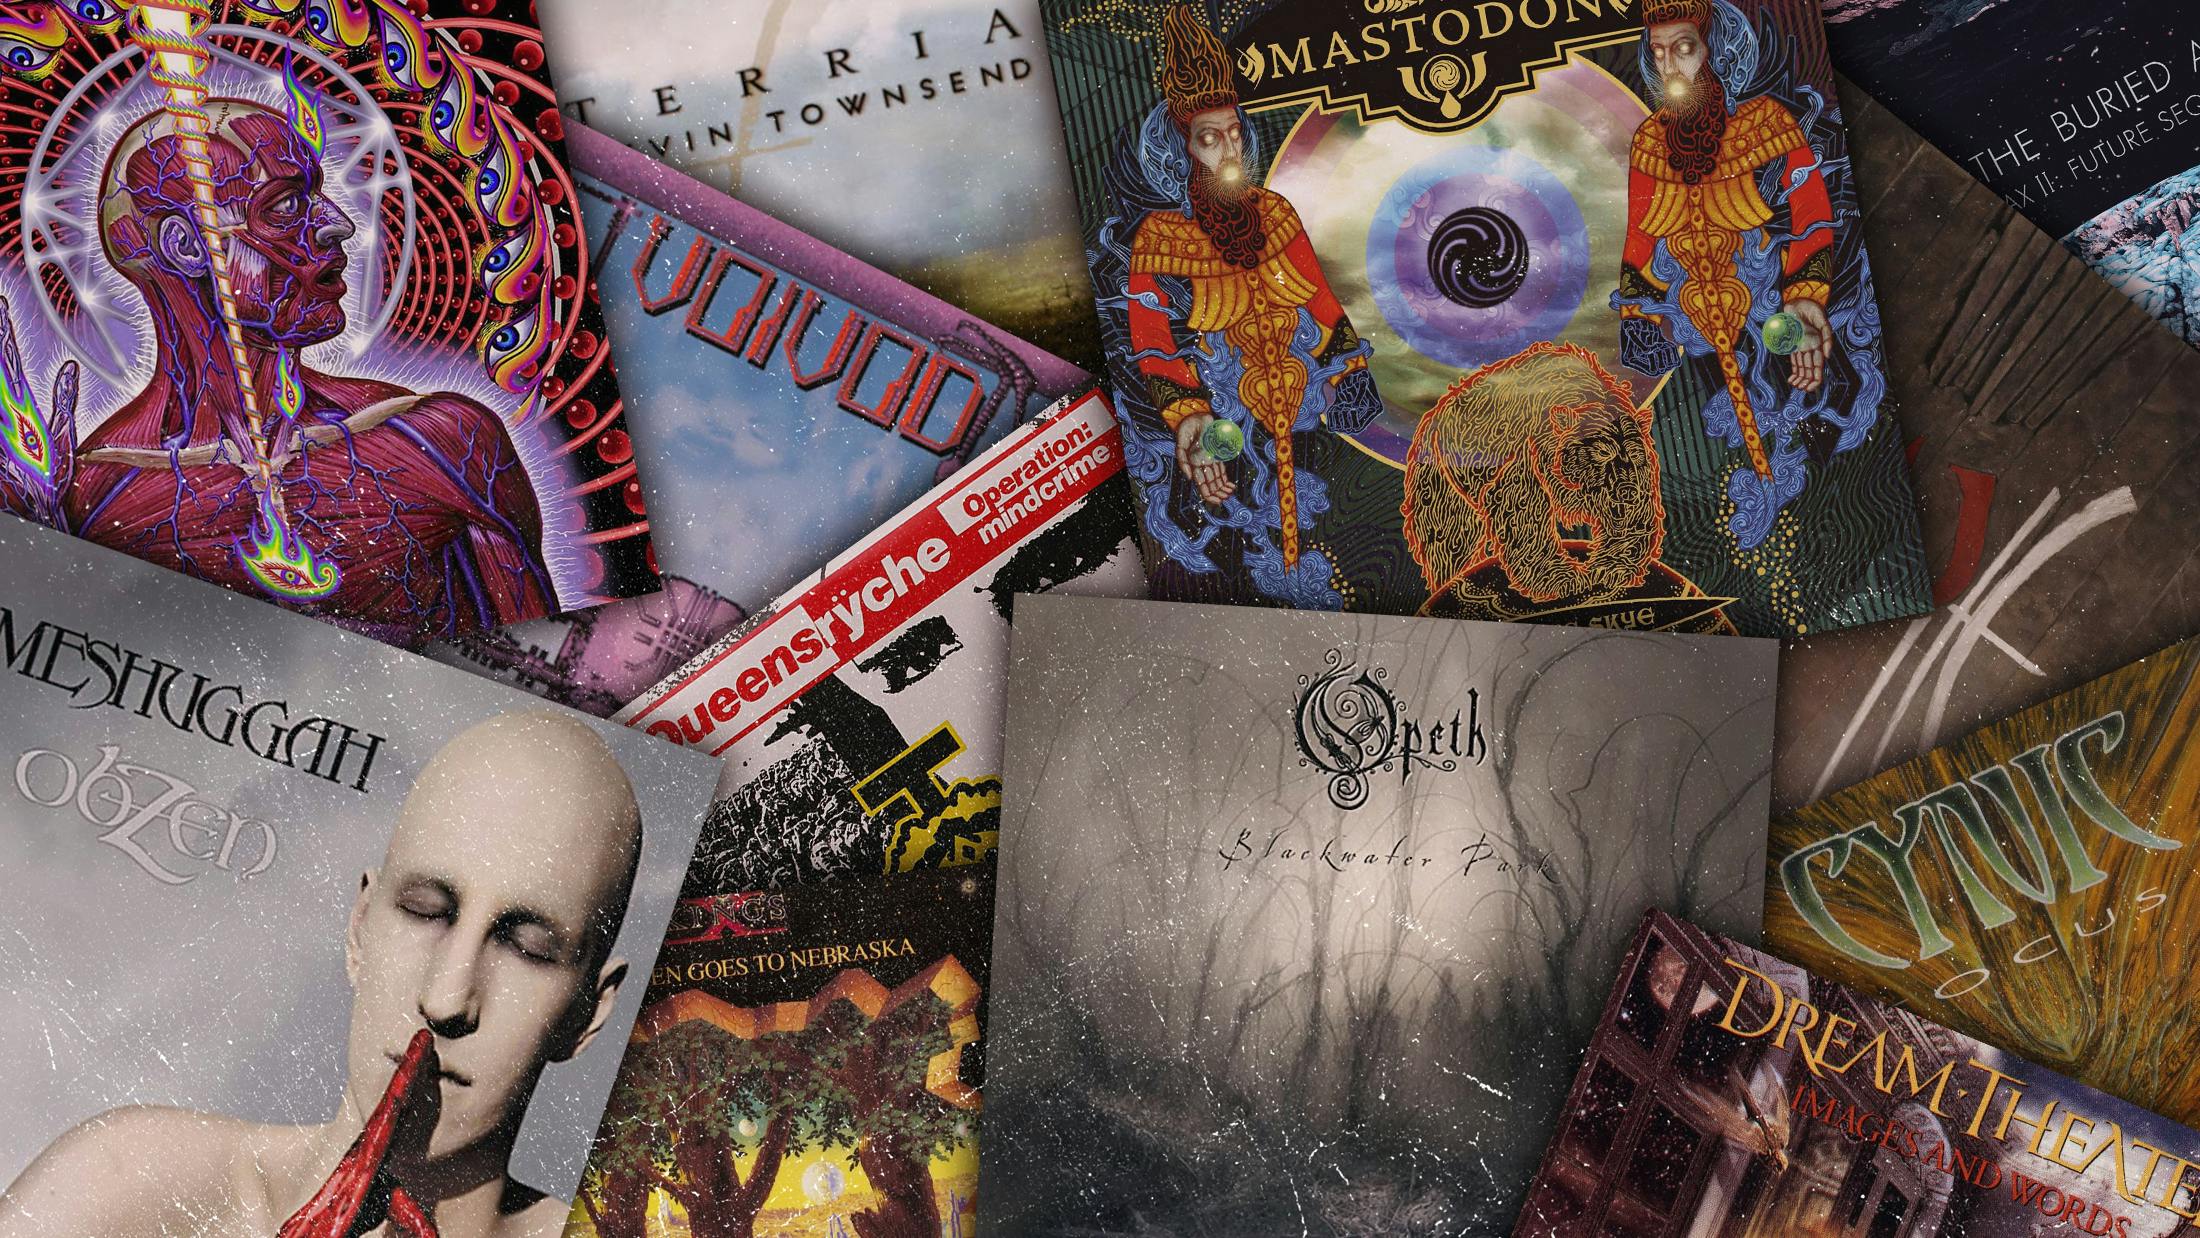 The 13 essential progressive metal albums you need to know